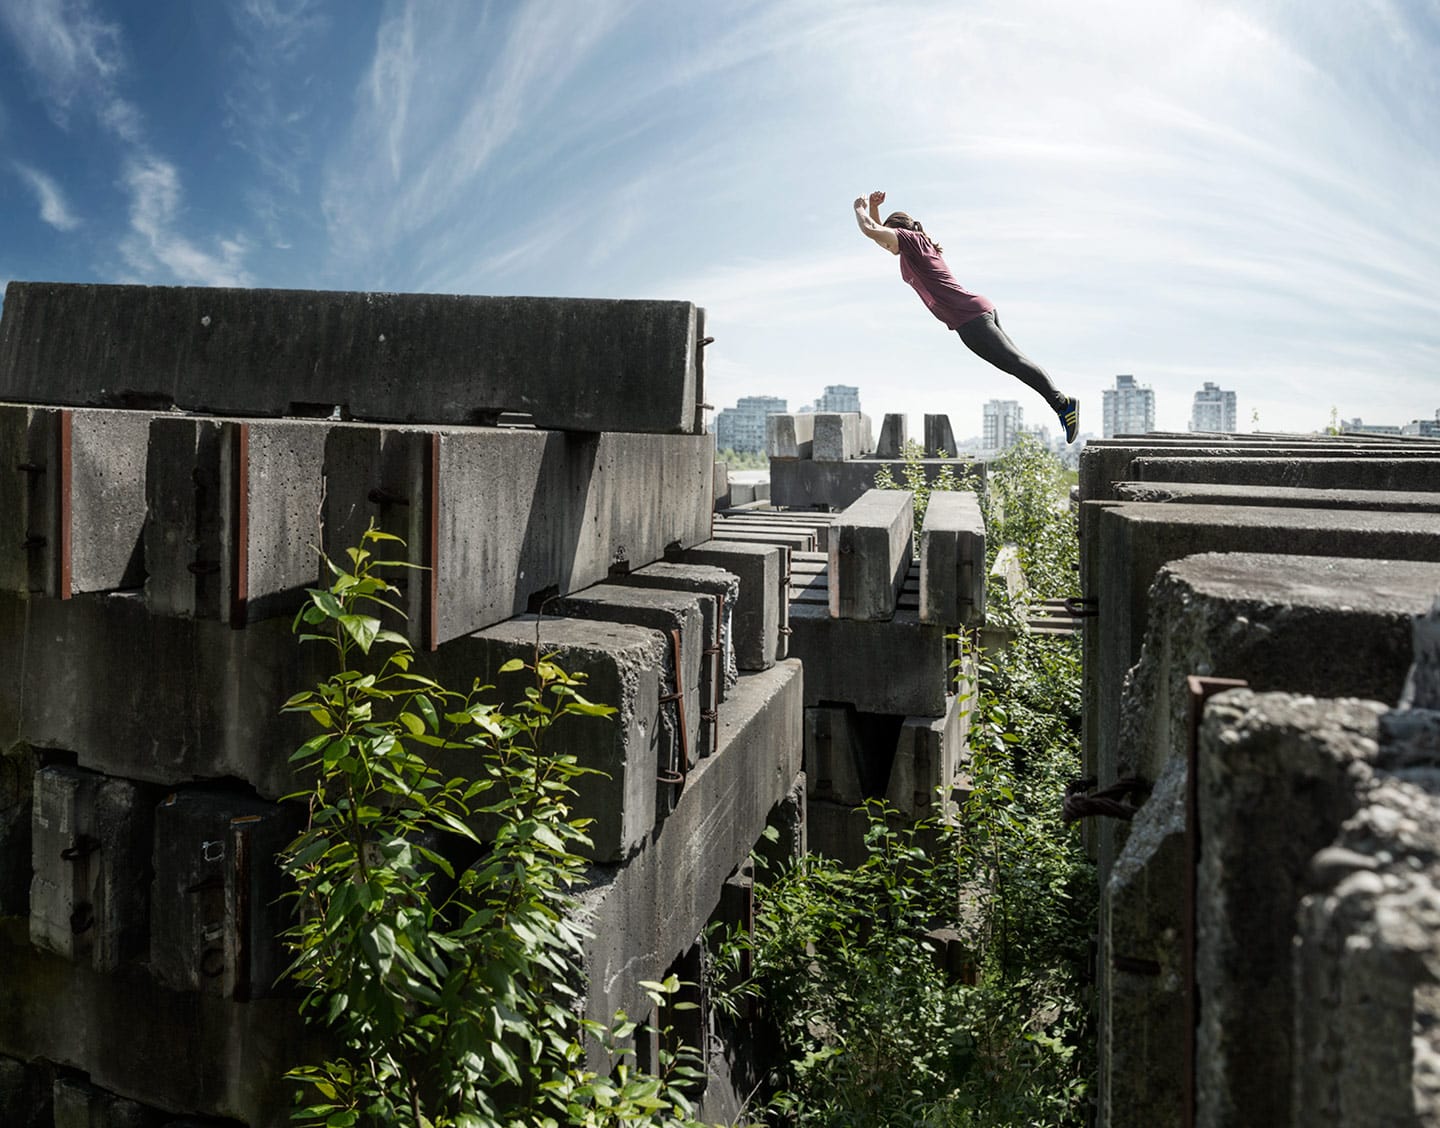 Parkour Athlete Arms Crossed Angled Jump Concrete Walls Background Bright Skies